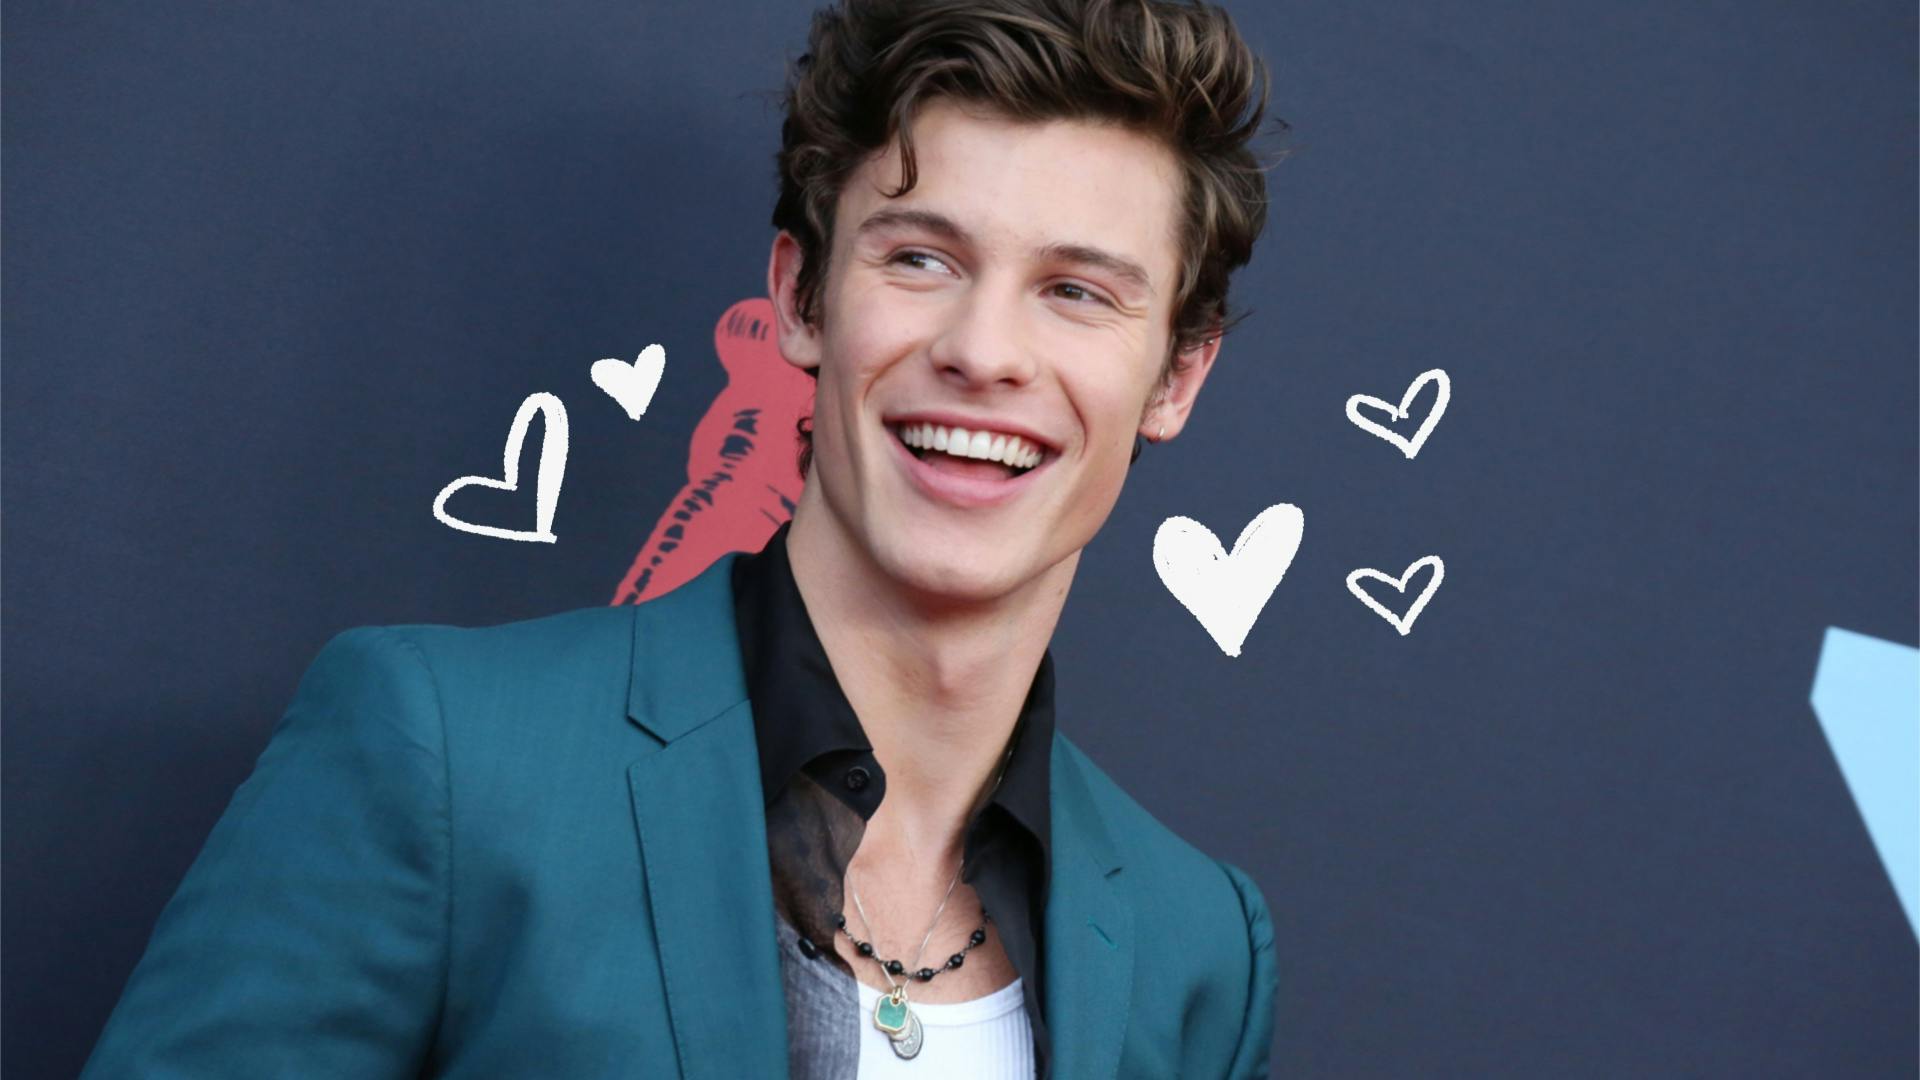 Shawn Mendes Shared His Number With Fans to Personally Text Him